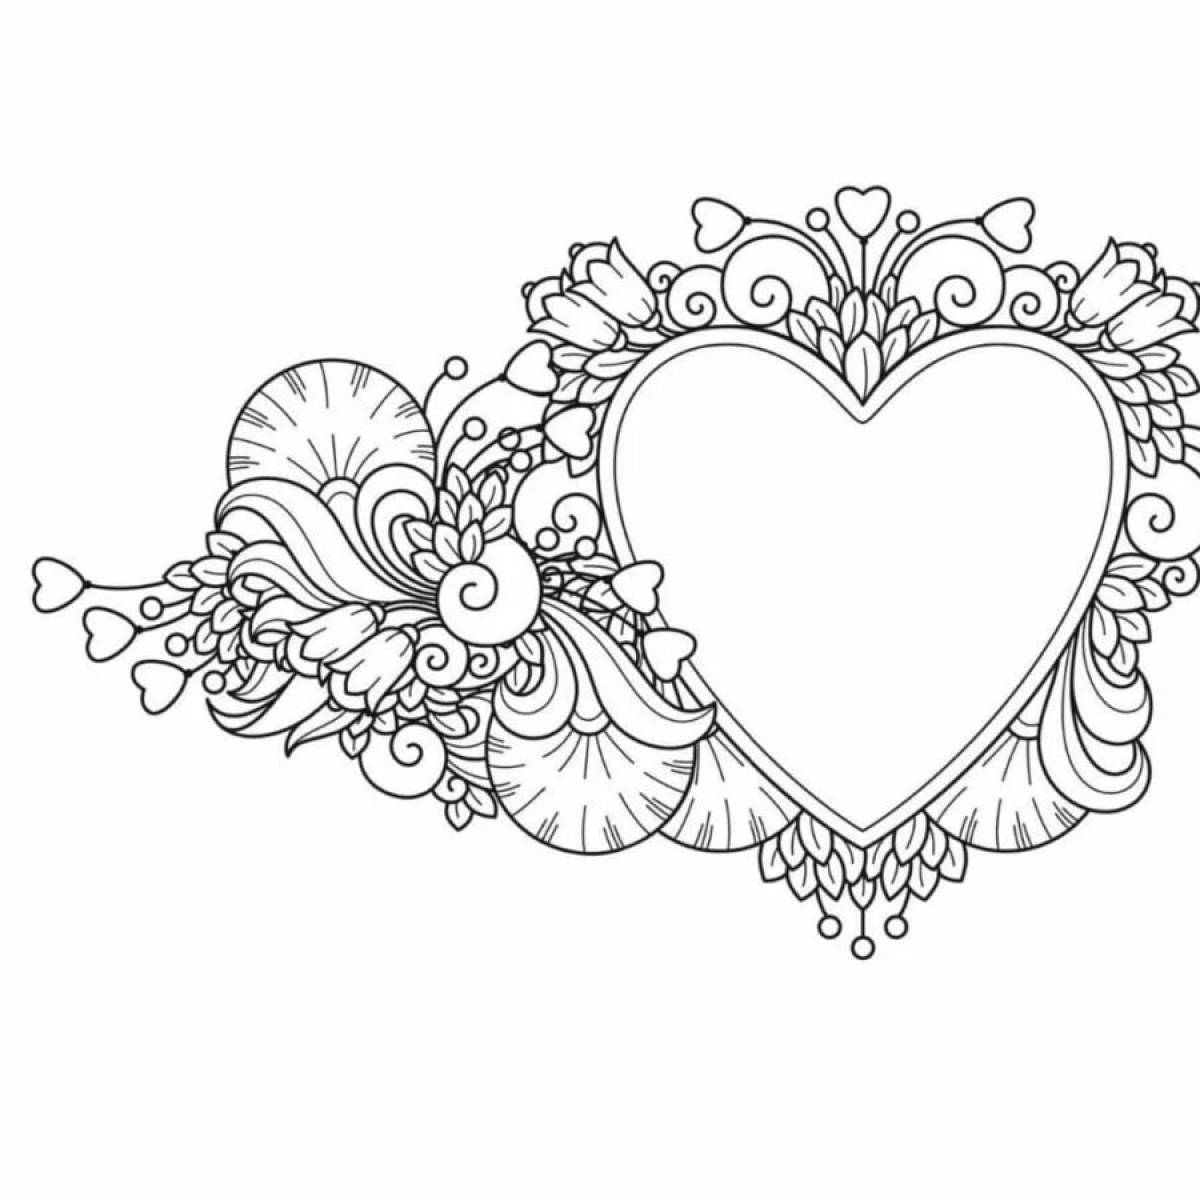 Luxurious heart coloring page